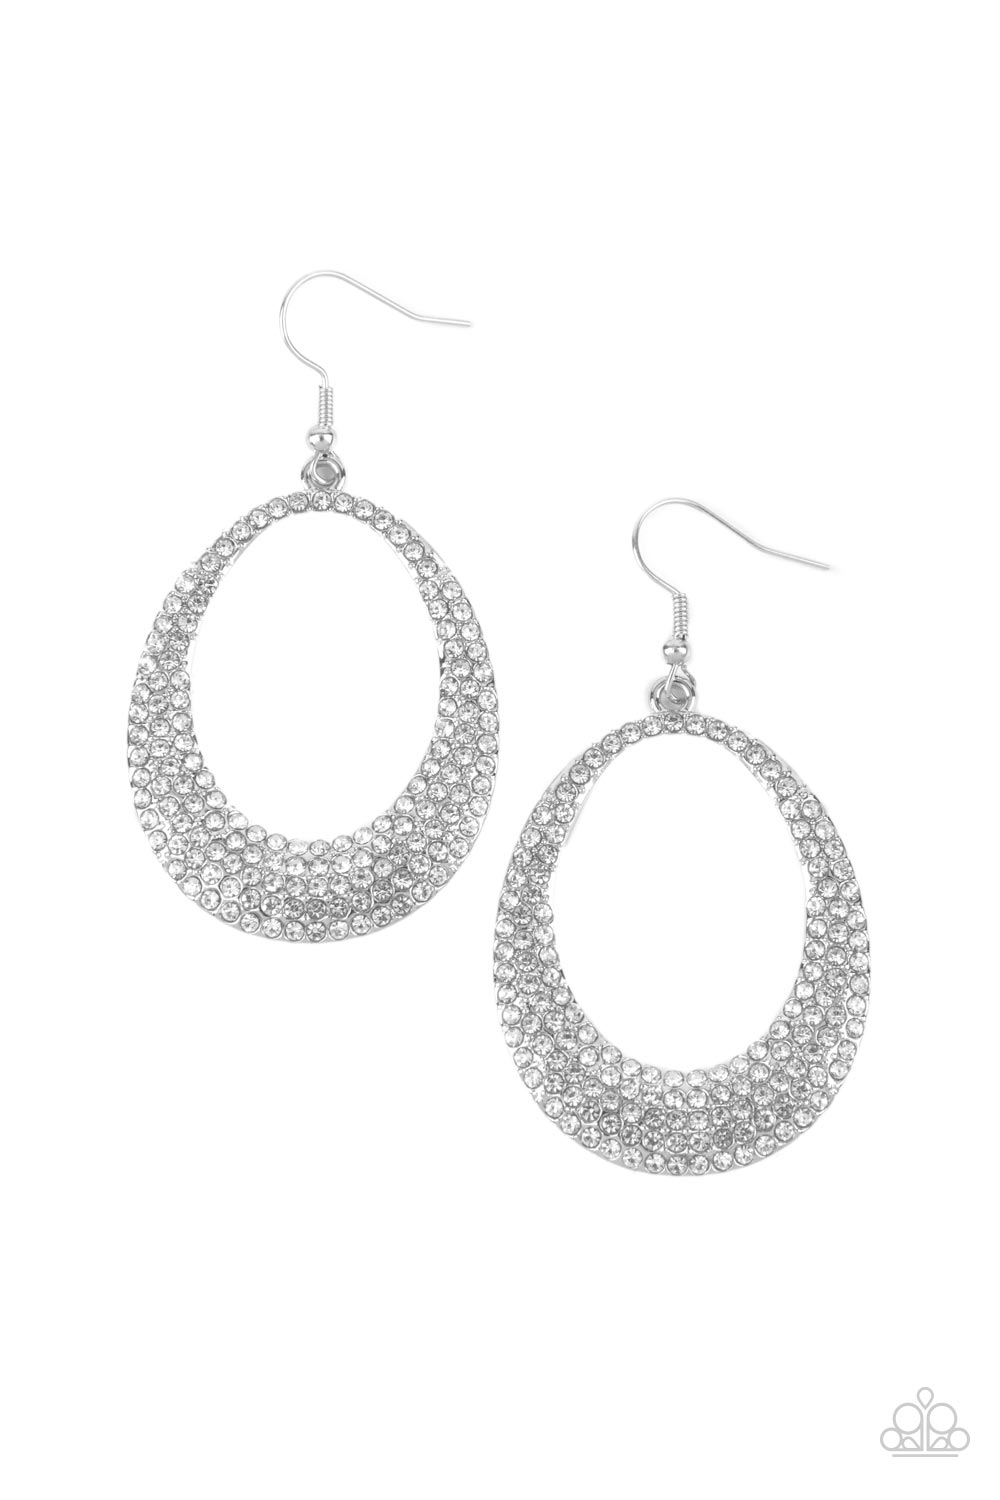 Paparazzi Accessories - Storybook Bride - White Earrings